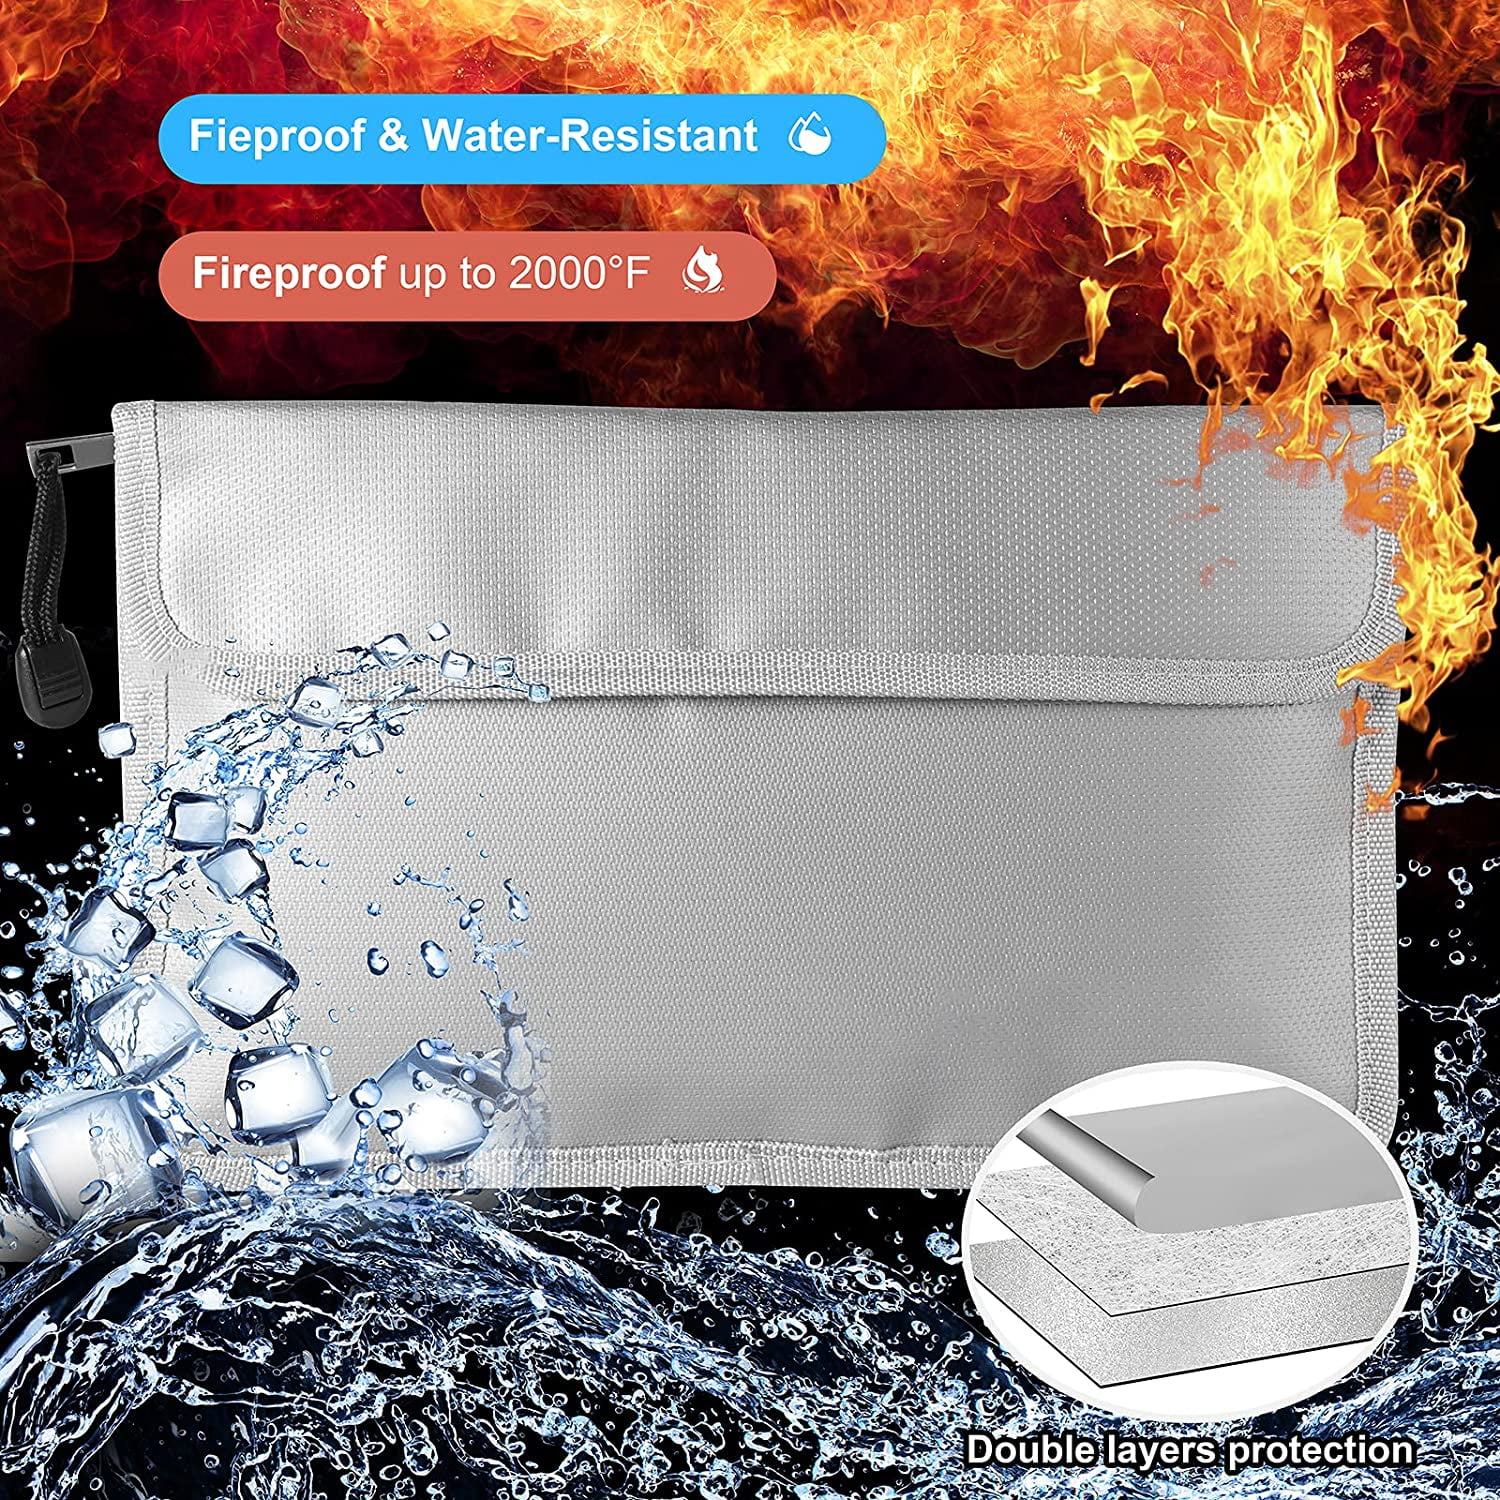 7''x11'' Fire proof pouch Money Document safe bag Fire Water Resistant material 